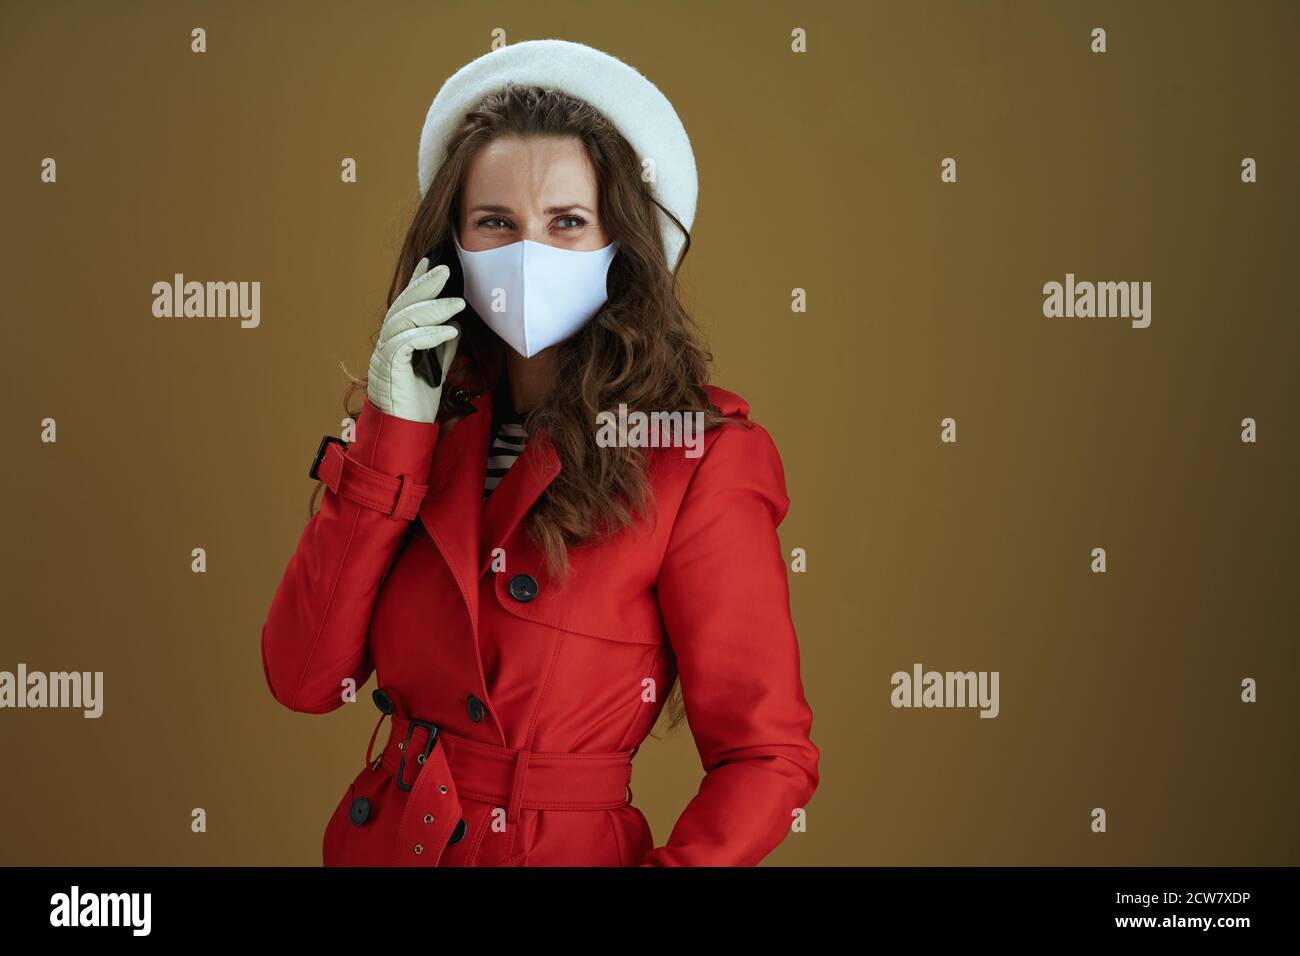 Life during covid-19 pandemic. smiling stylish woman in red coat using a smartphone against brown background. Stock Photo